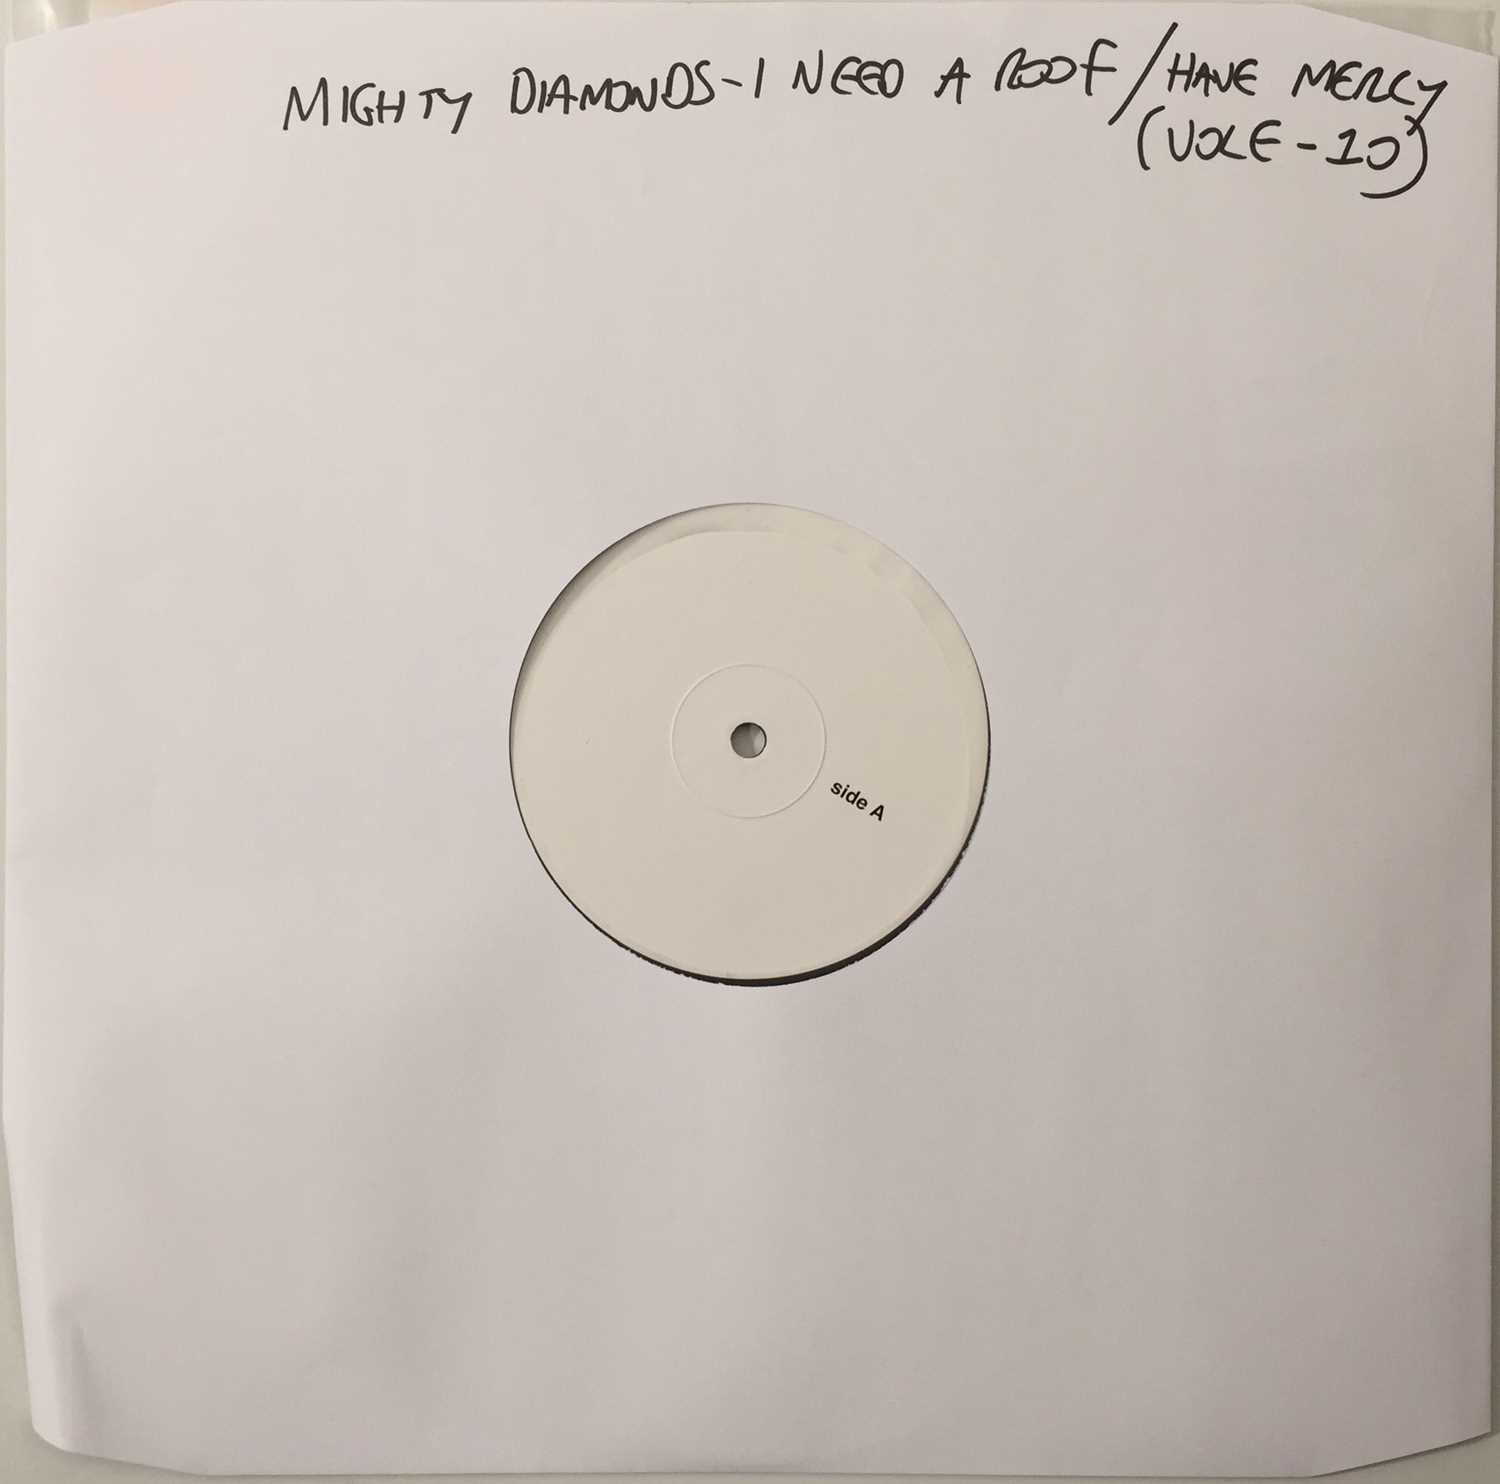 Lot 41 - MIGHTY DIAMONDS - I NEED A ROOF / HAVE MERCY 12" (2013 WHITE LABEL TEST PRESSING - VOLE-10)